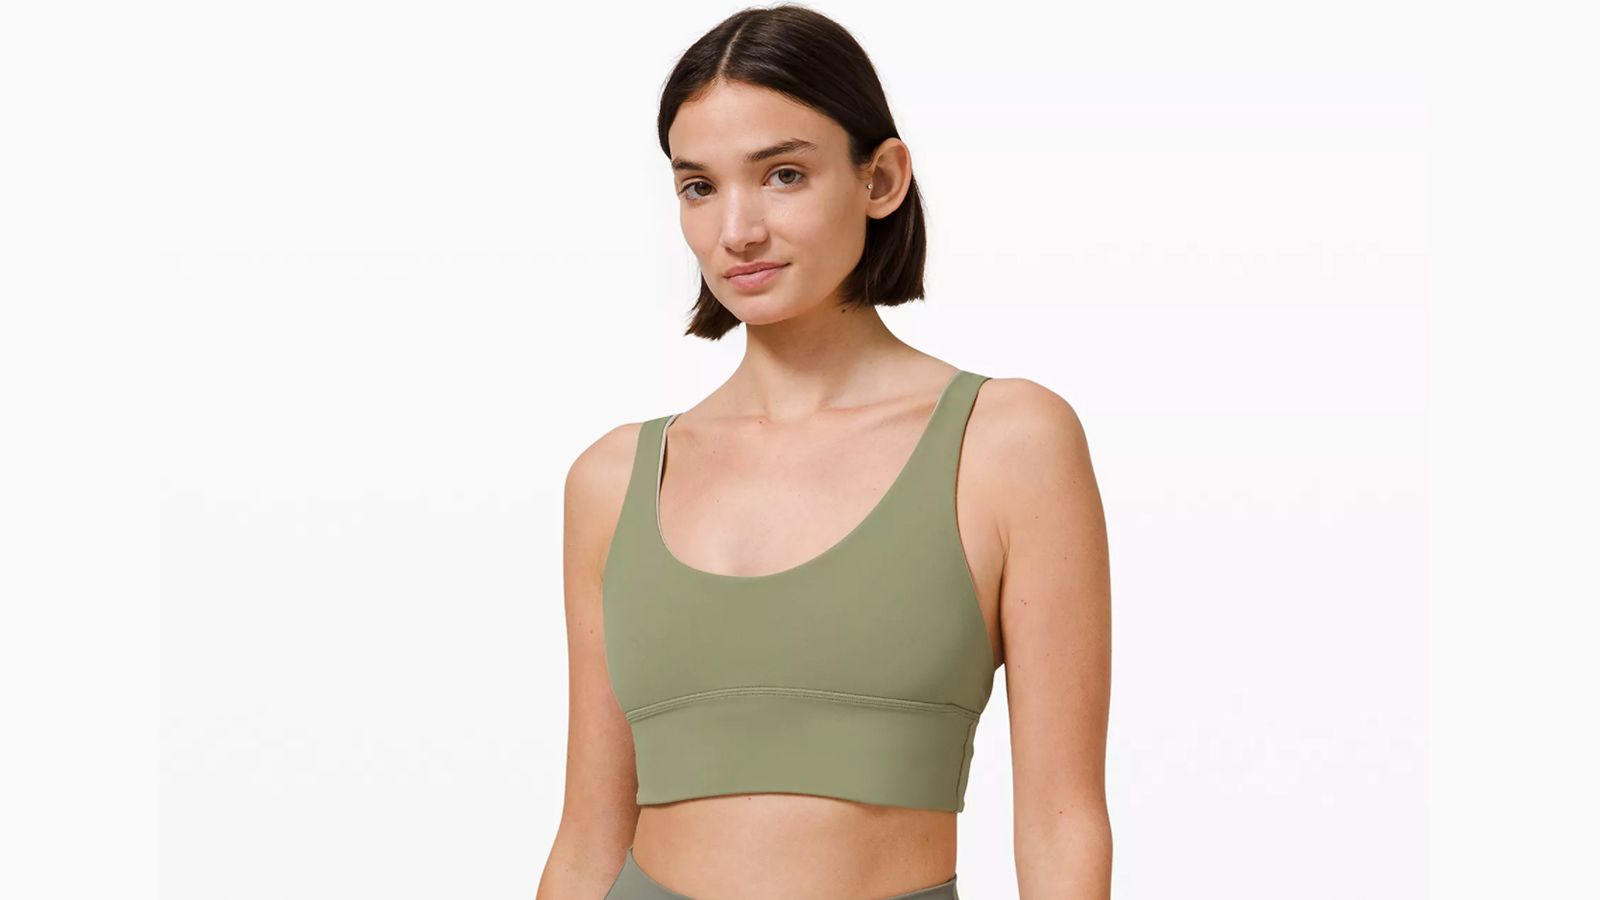 Workout Gear Inspired By Lululemon on  - An Unblurred Lady  Womens  workout outfits, Women's sports bras, Active wear for women